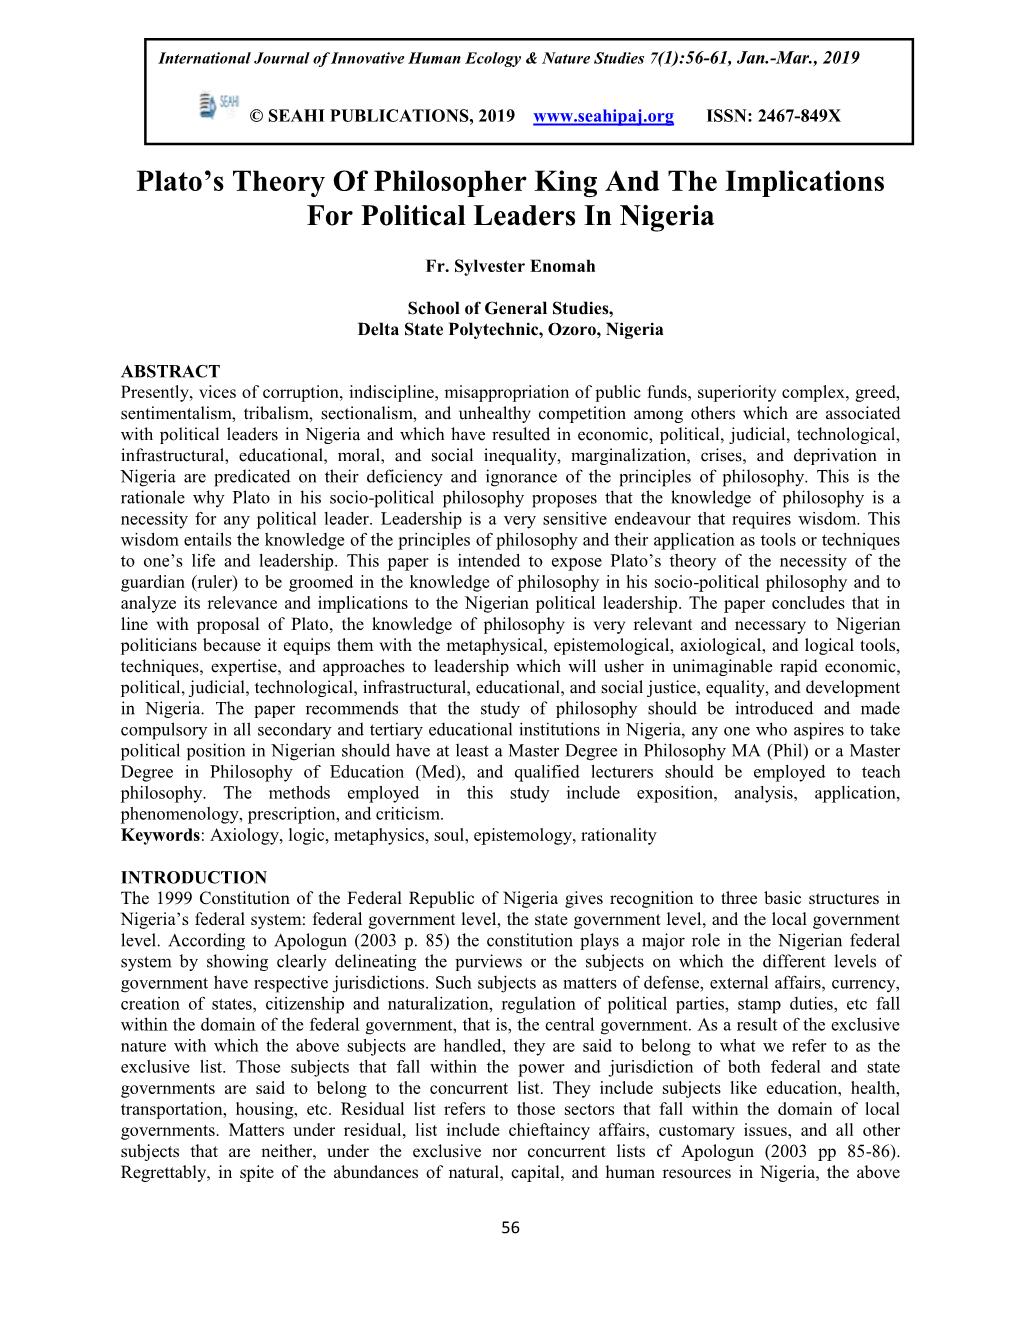 Plato's Theory of Philosopher King and the Implications for Political